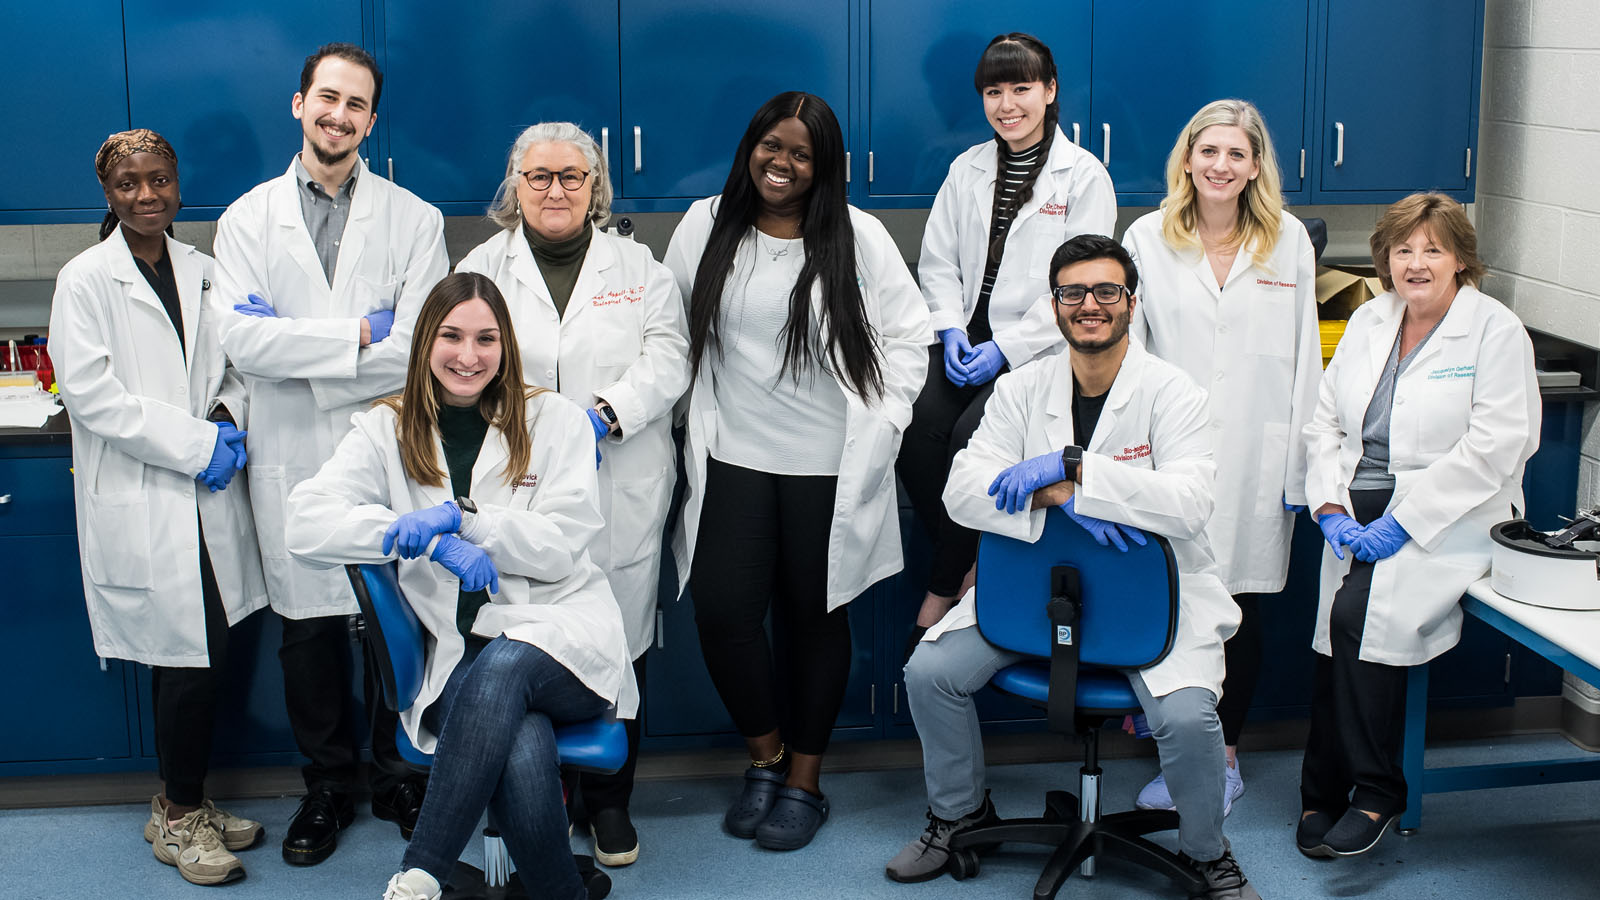 Biomedical sciences students smiling in PCOM's imaging laboratory